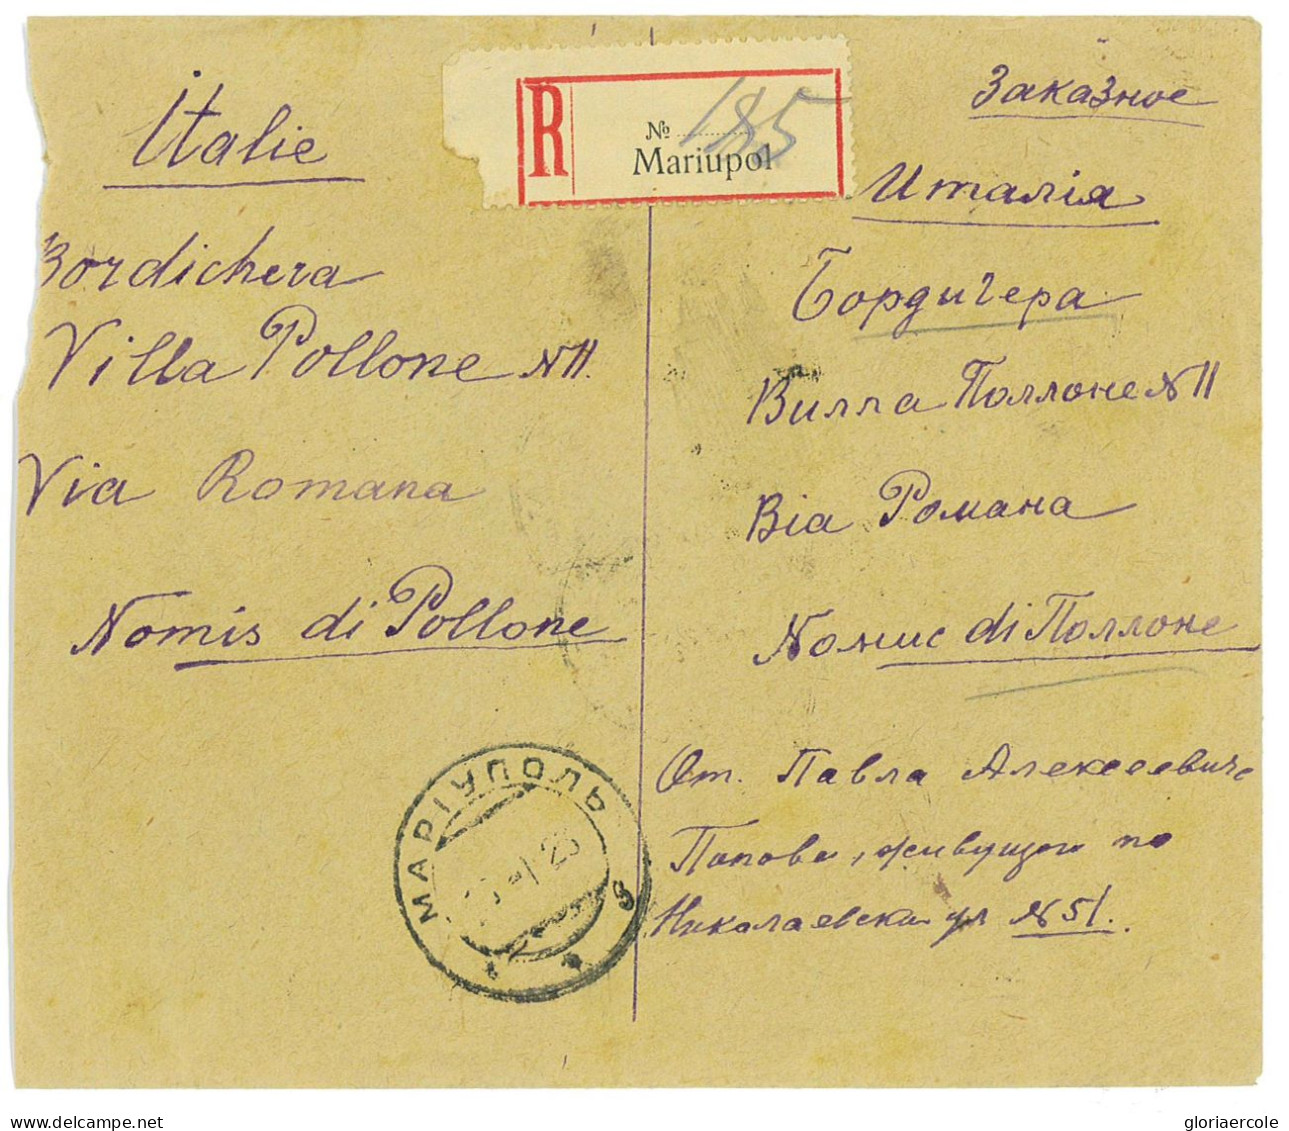 P2912 - RUSSIA , 700 RUBEL LETTER REGISTERED FROM MARIUPOL 1923 TO ITALY - Storia Postale